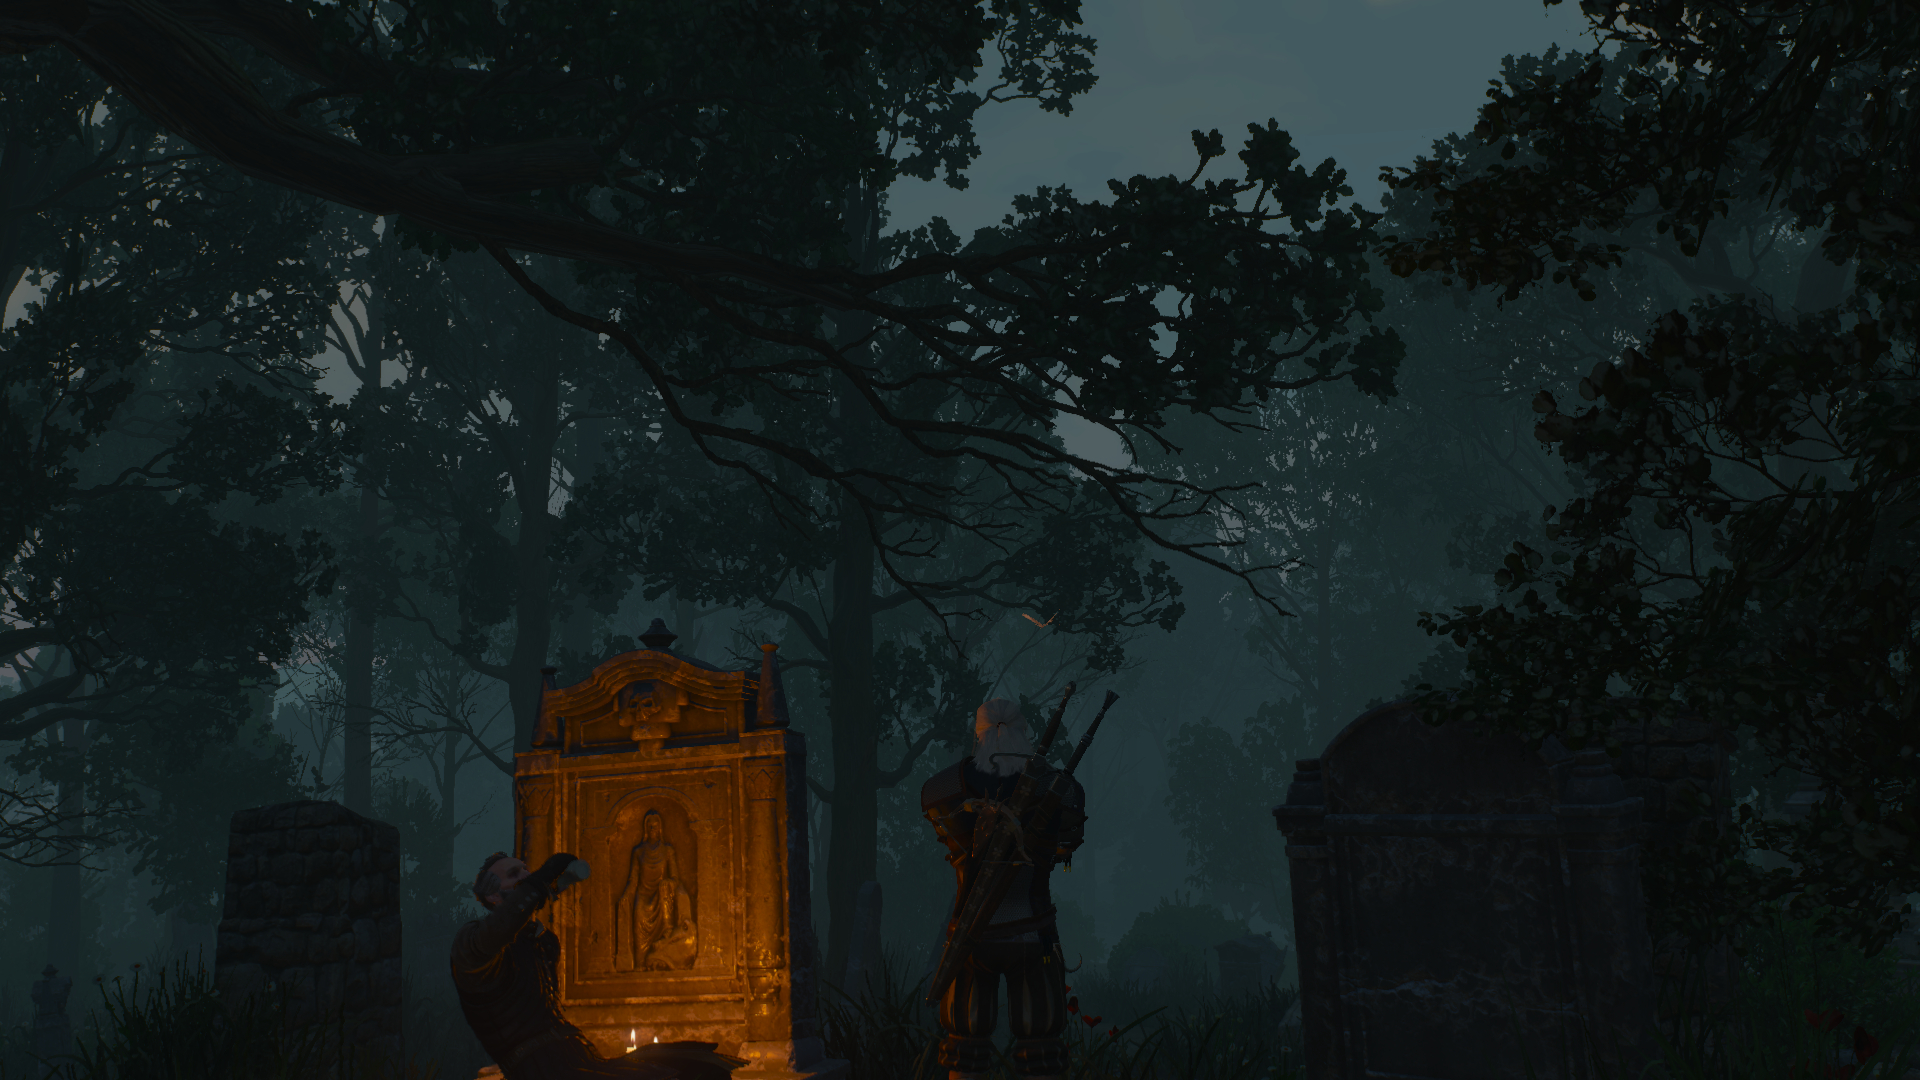 The Witcher 3: Blood And Wine: The Kotaku Review